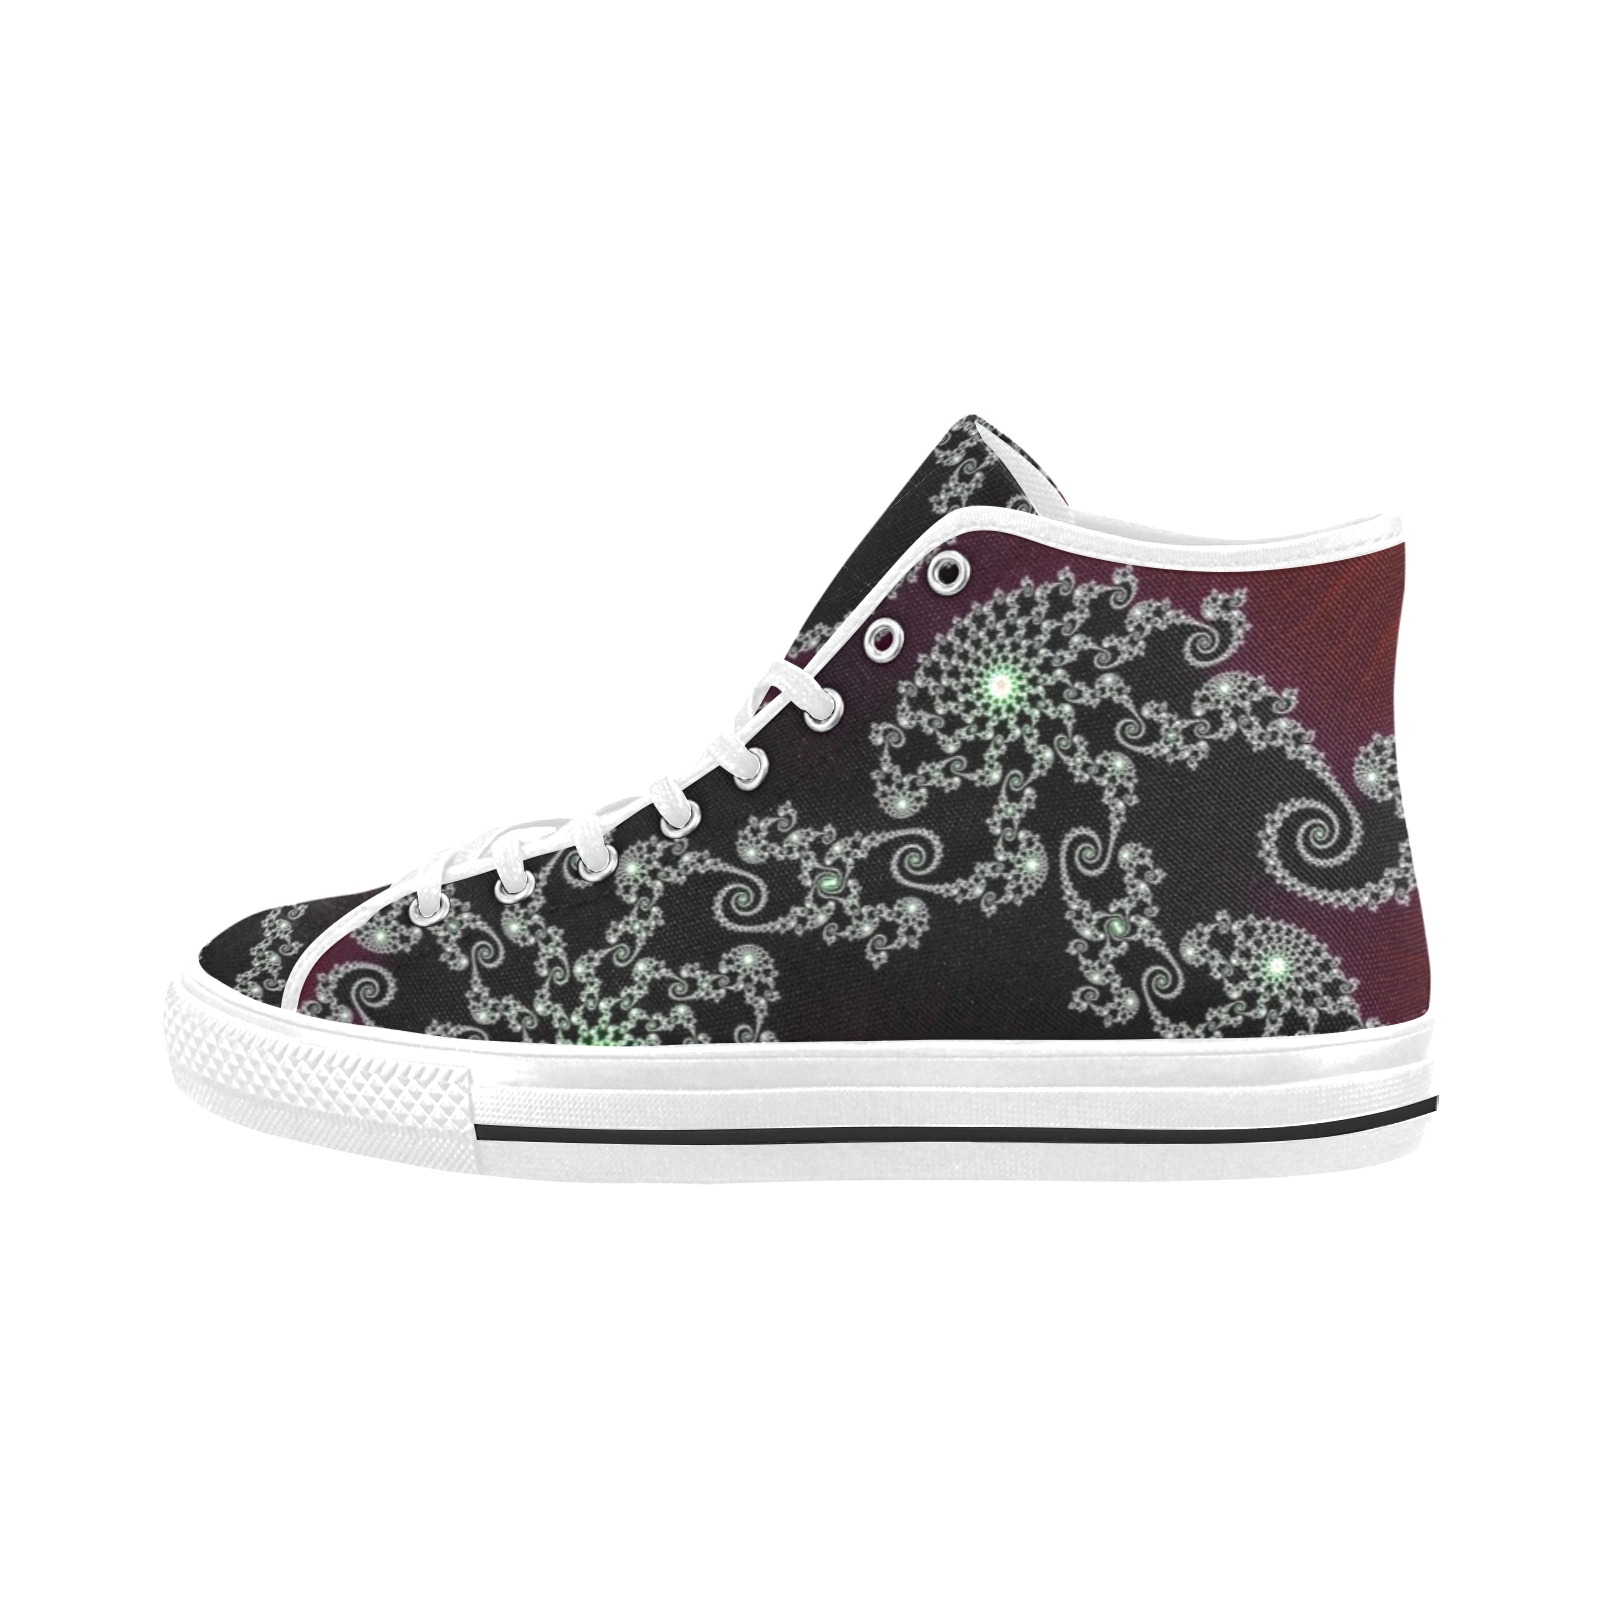 Black and White Lace on Maroon Velvet Fractal Abstract Vancouver H Women's Canvas Shoes (1013-1)